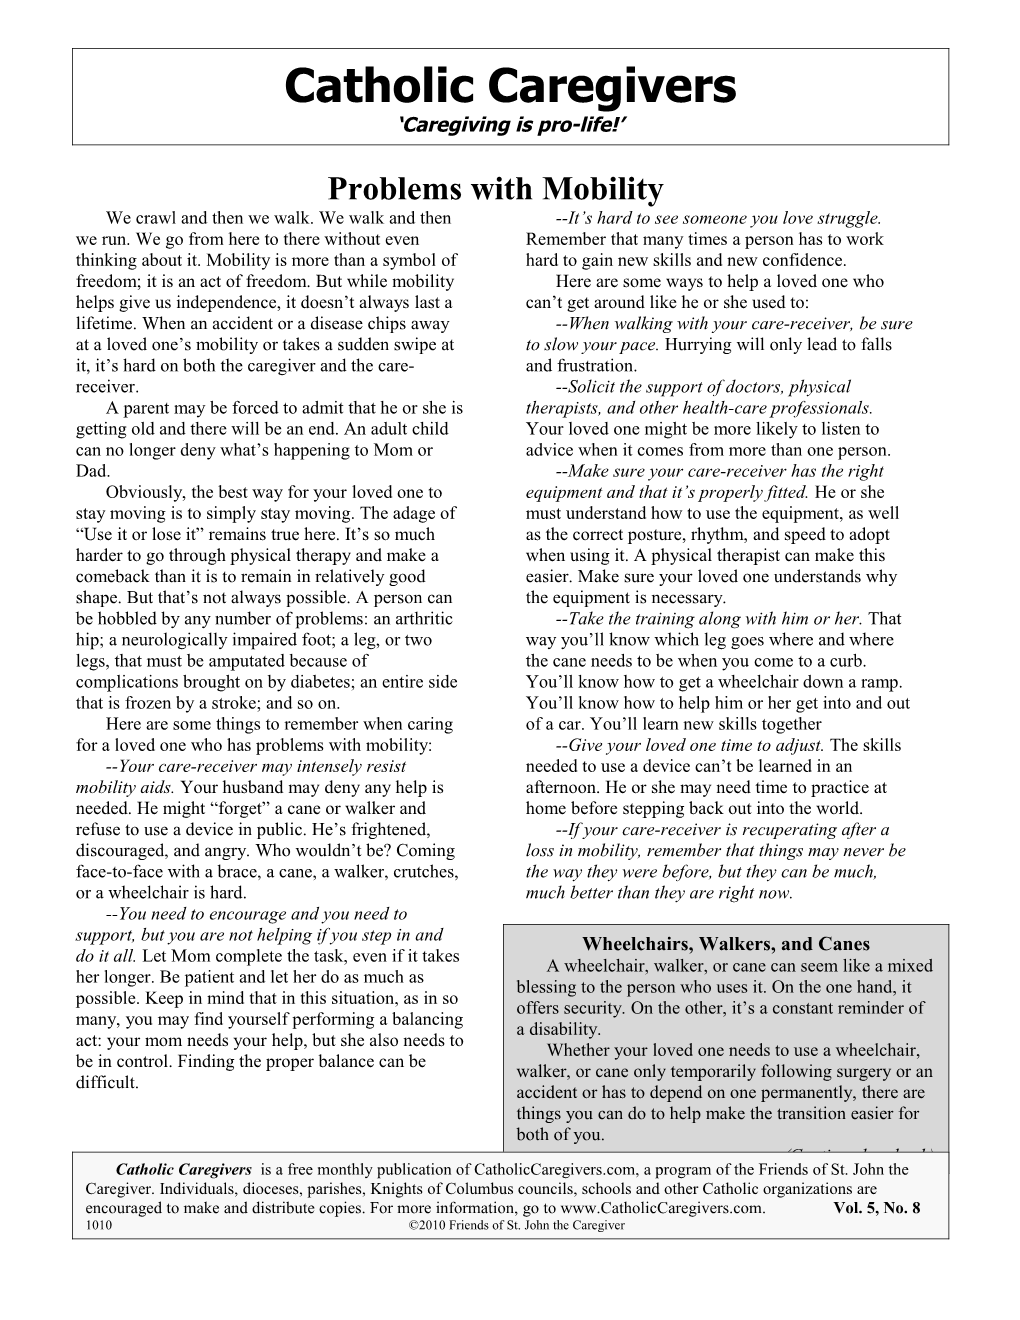 Problems with Mobility